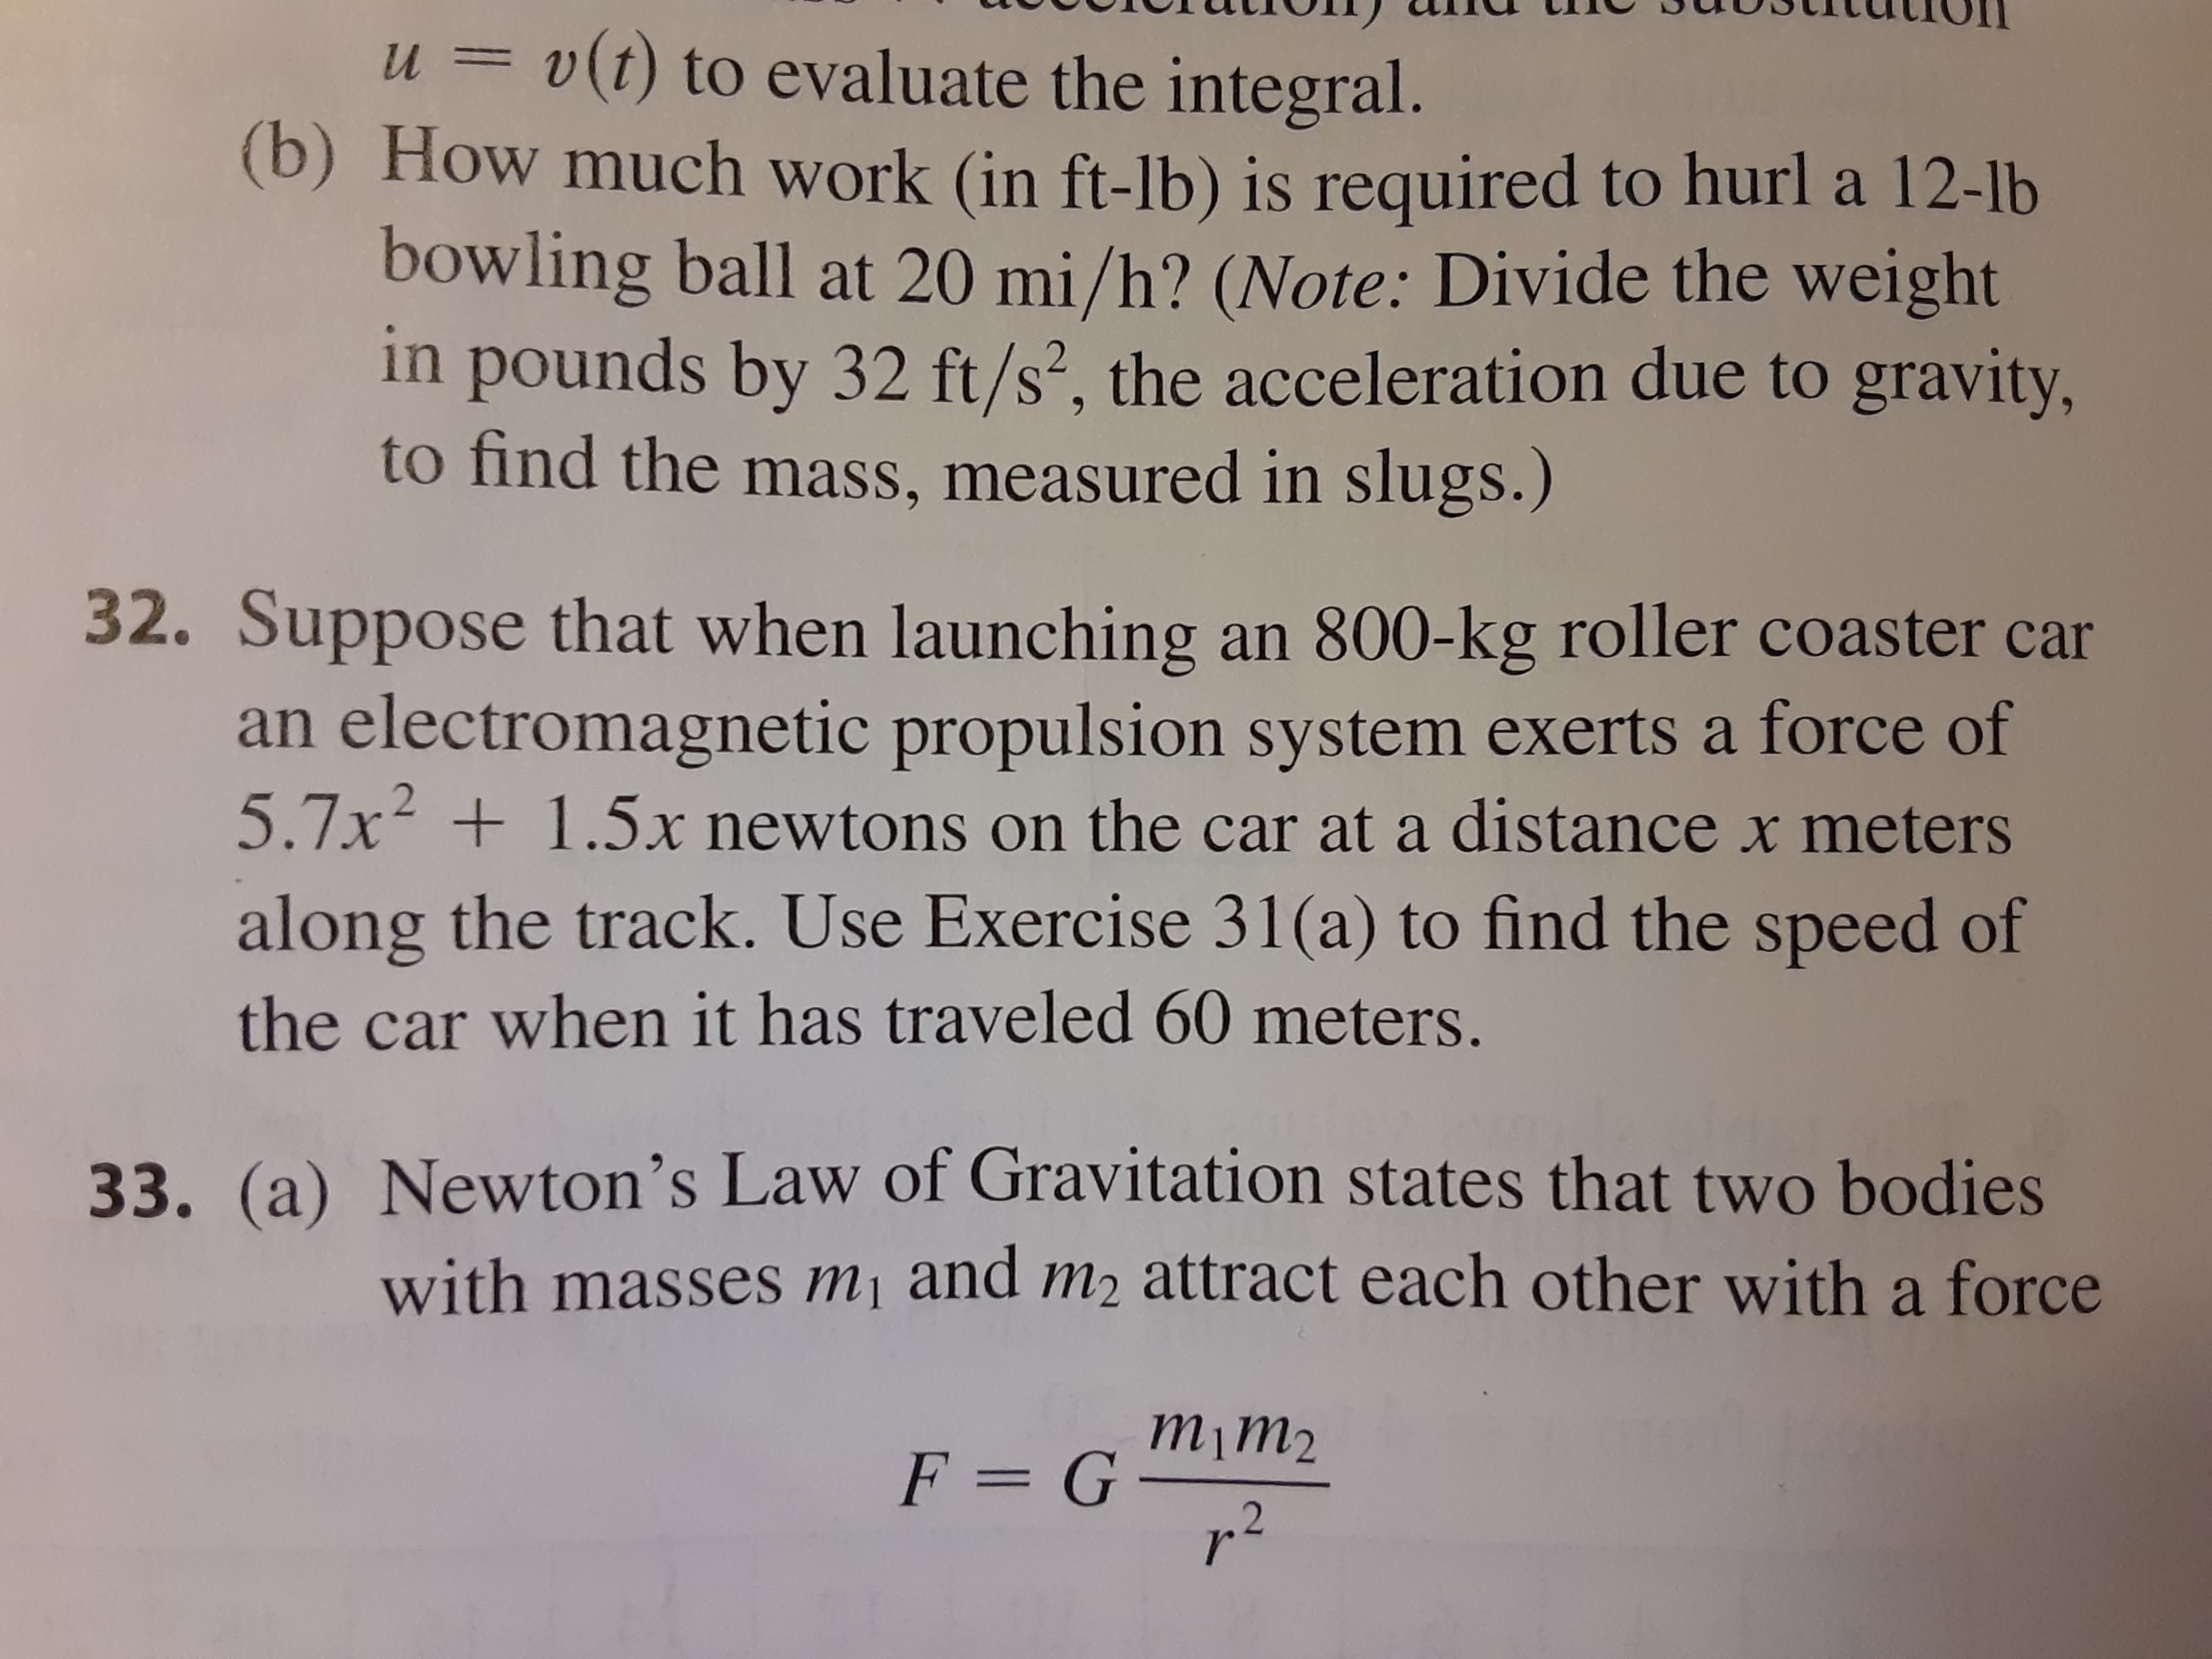 Suppose that when launching an 800-kg roller coaster car
an electromagnetic propulsion system exerts a force of
5.7x +1.5x newtons on the car at a distance x meters
along the track. Use Exercise 31(a) to find the speed of
the car when it has traveled 60 meters.
